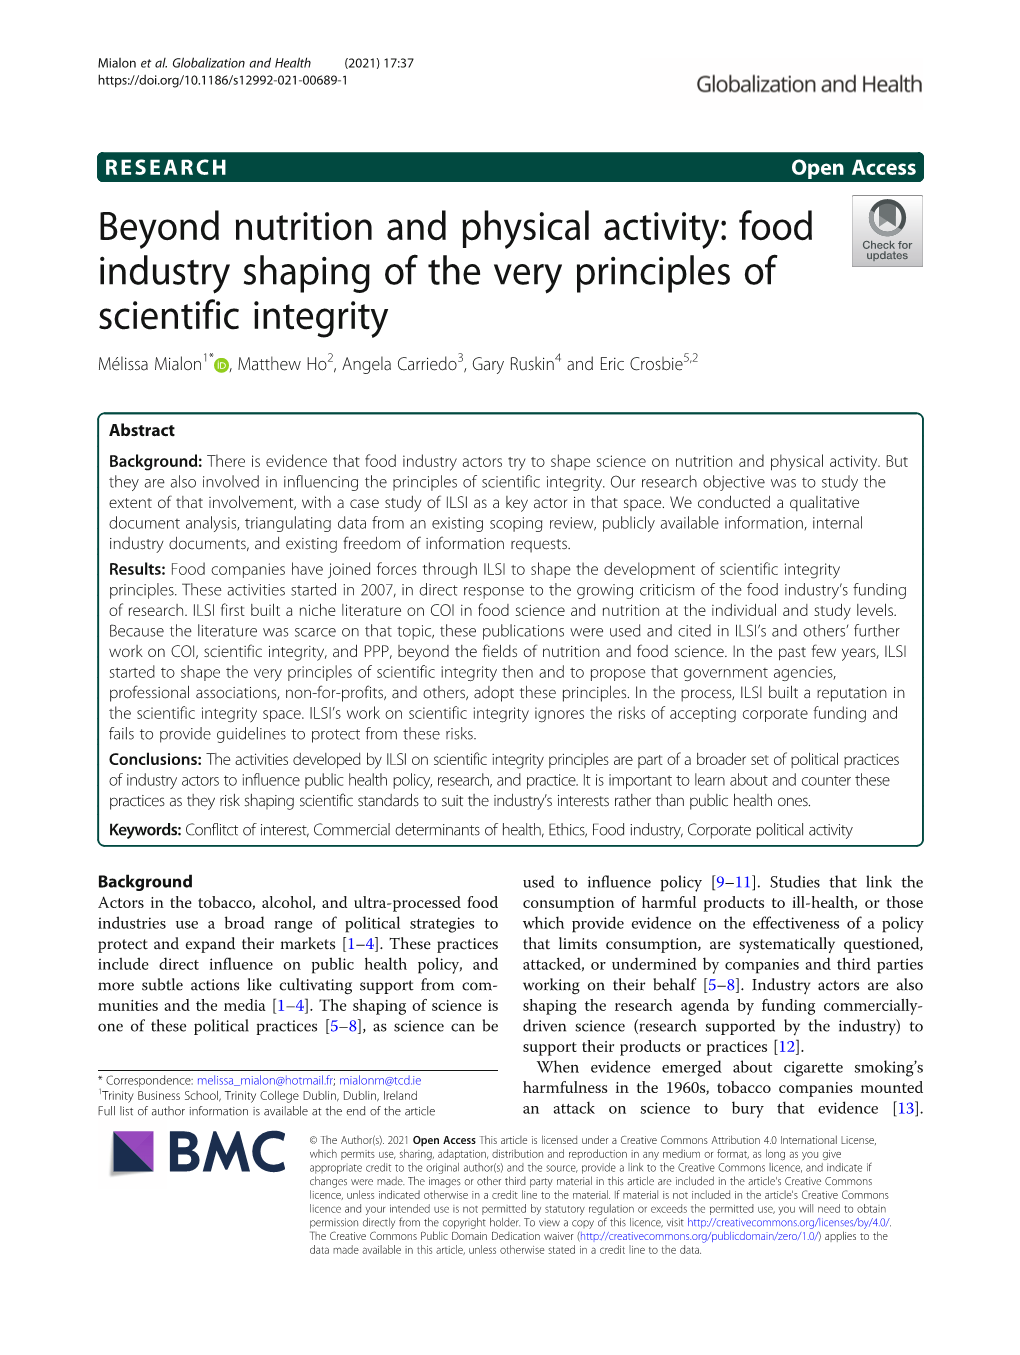 Food Industry Shaping of the Very Principles of Scientific Integrity Mélissa Mialon1* , Matthew Ho2, Angela Carriedo3, Gary Ruskin4 and Eric Crosbie5,2